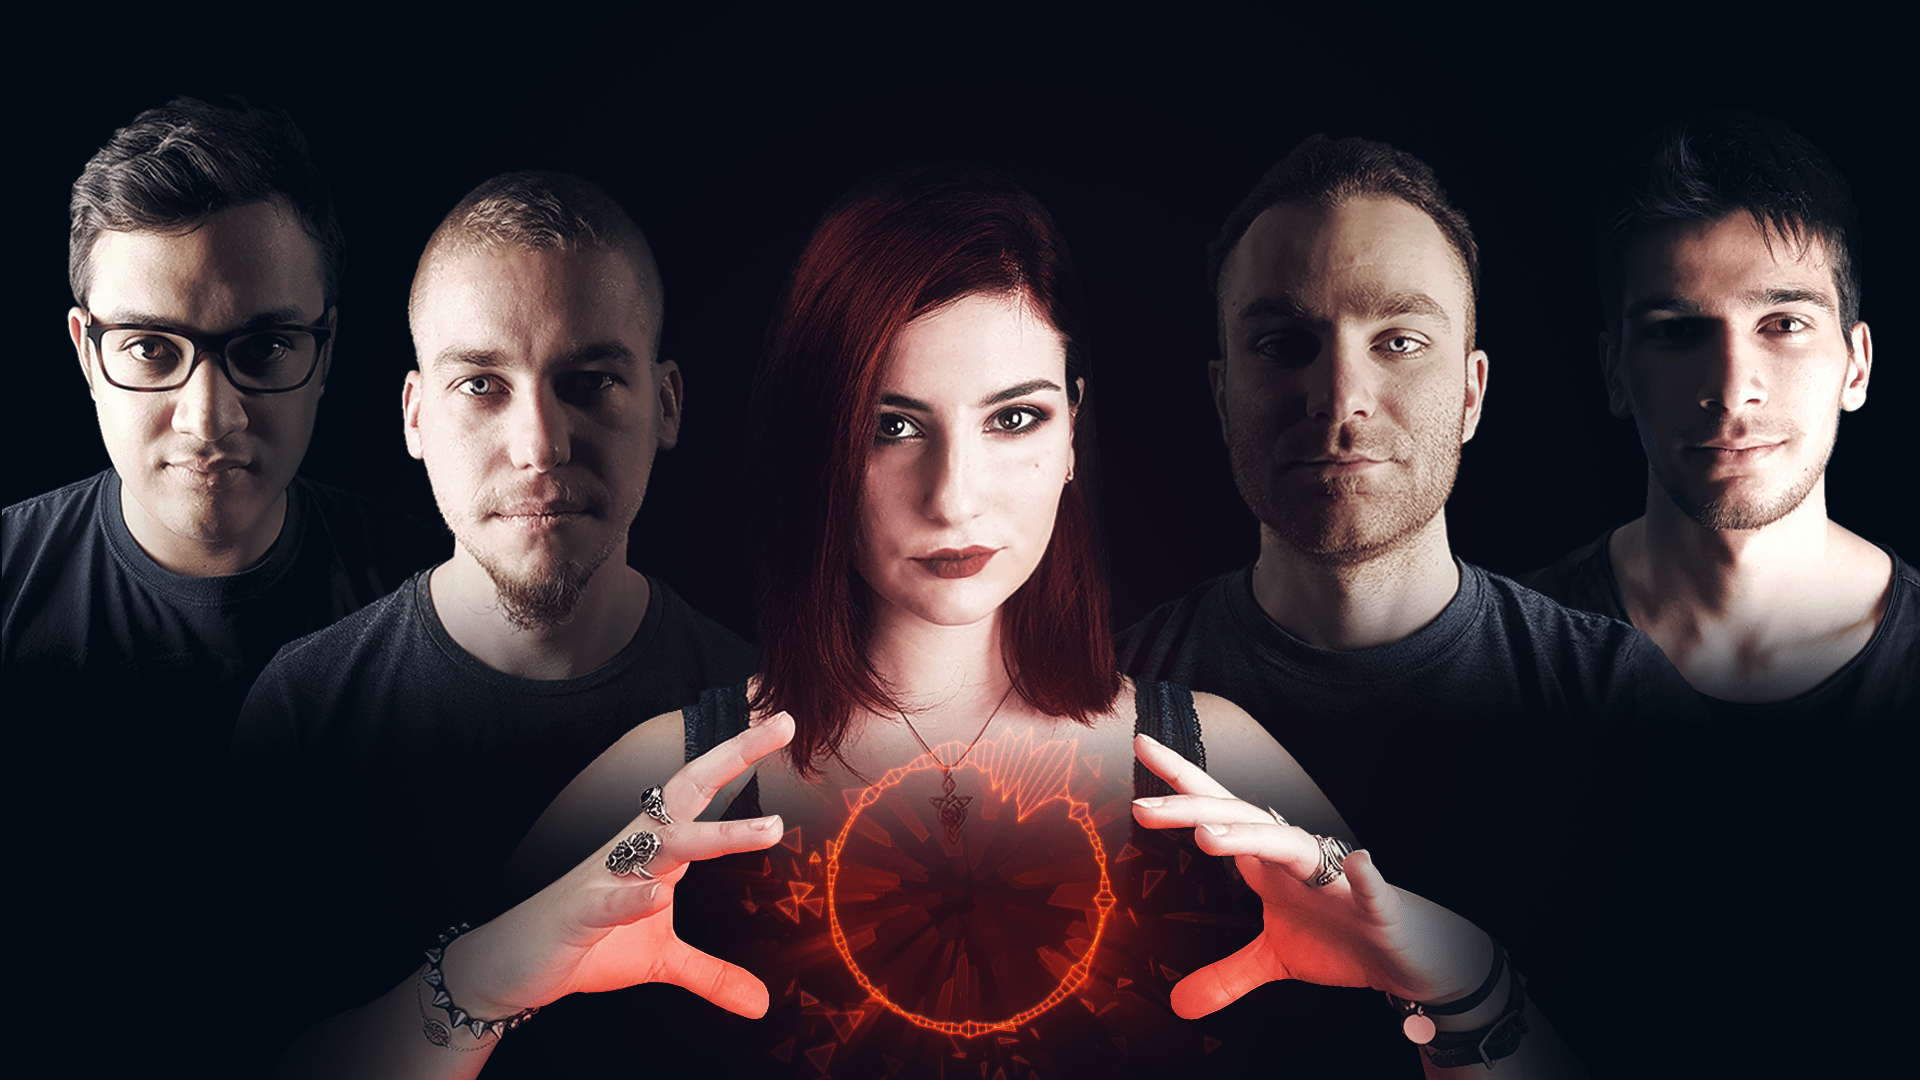 Dystopie – Interview with Emma Piconnet & ‘Uprising’ Album Review